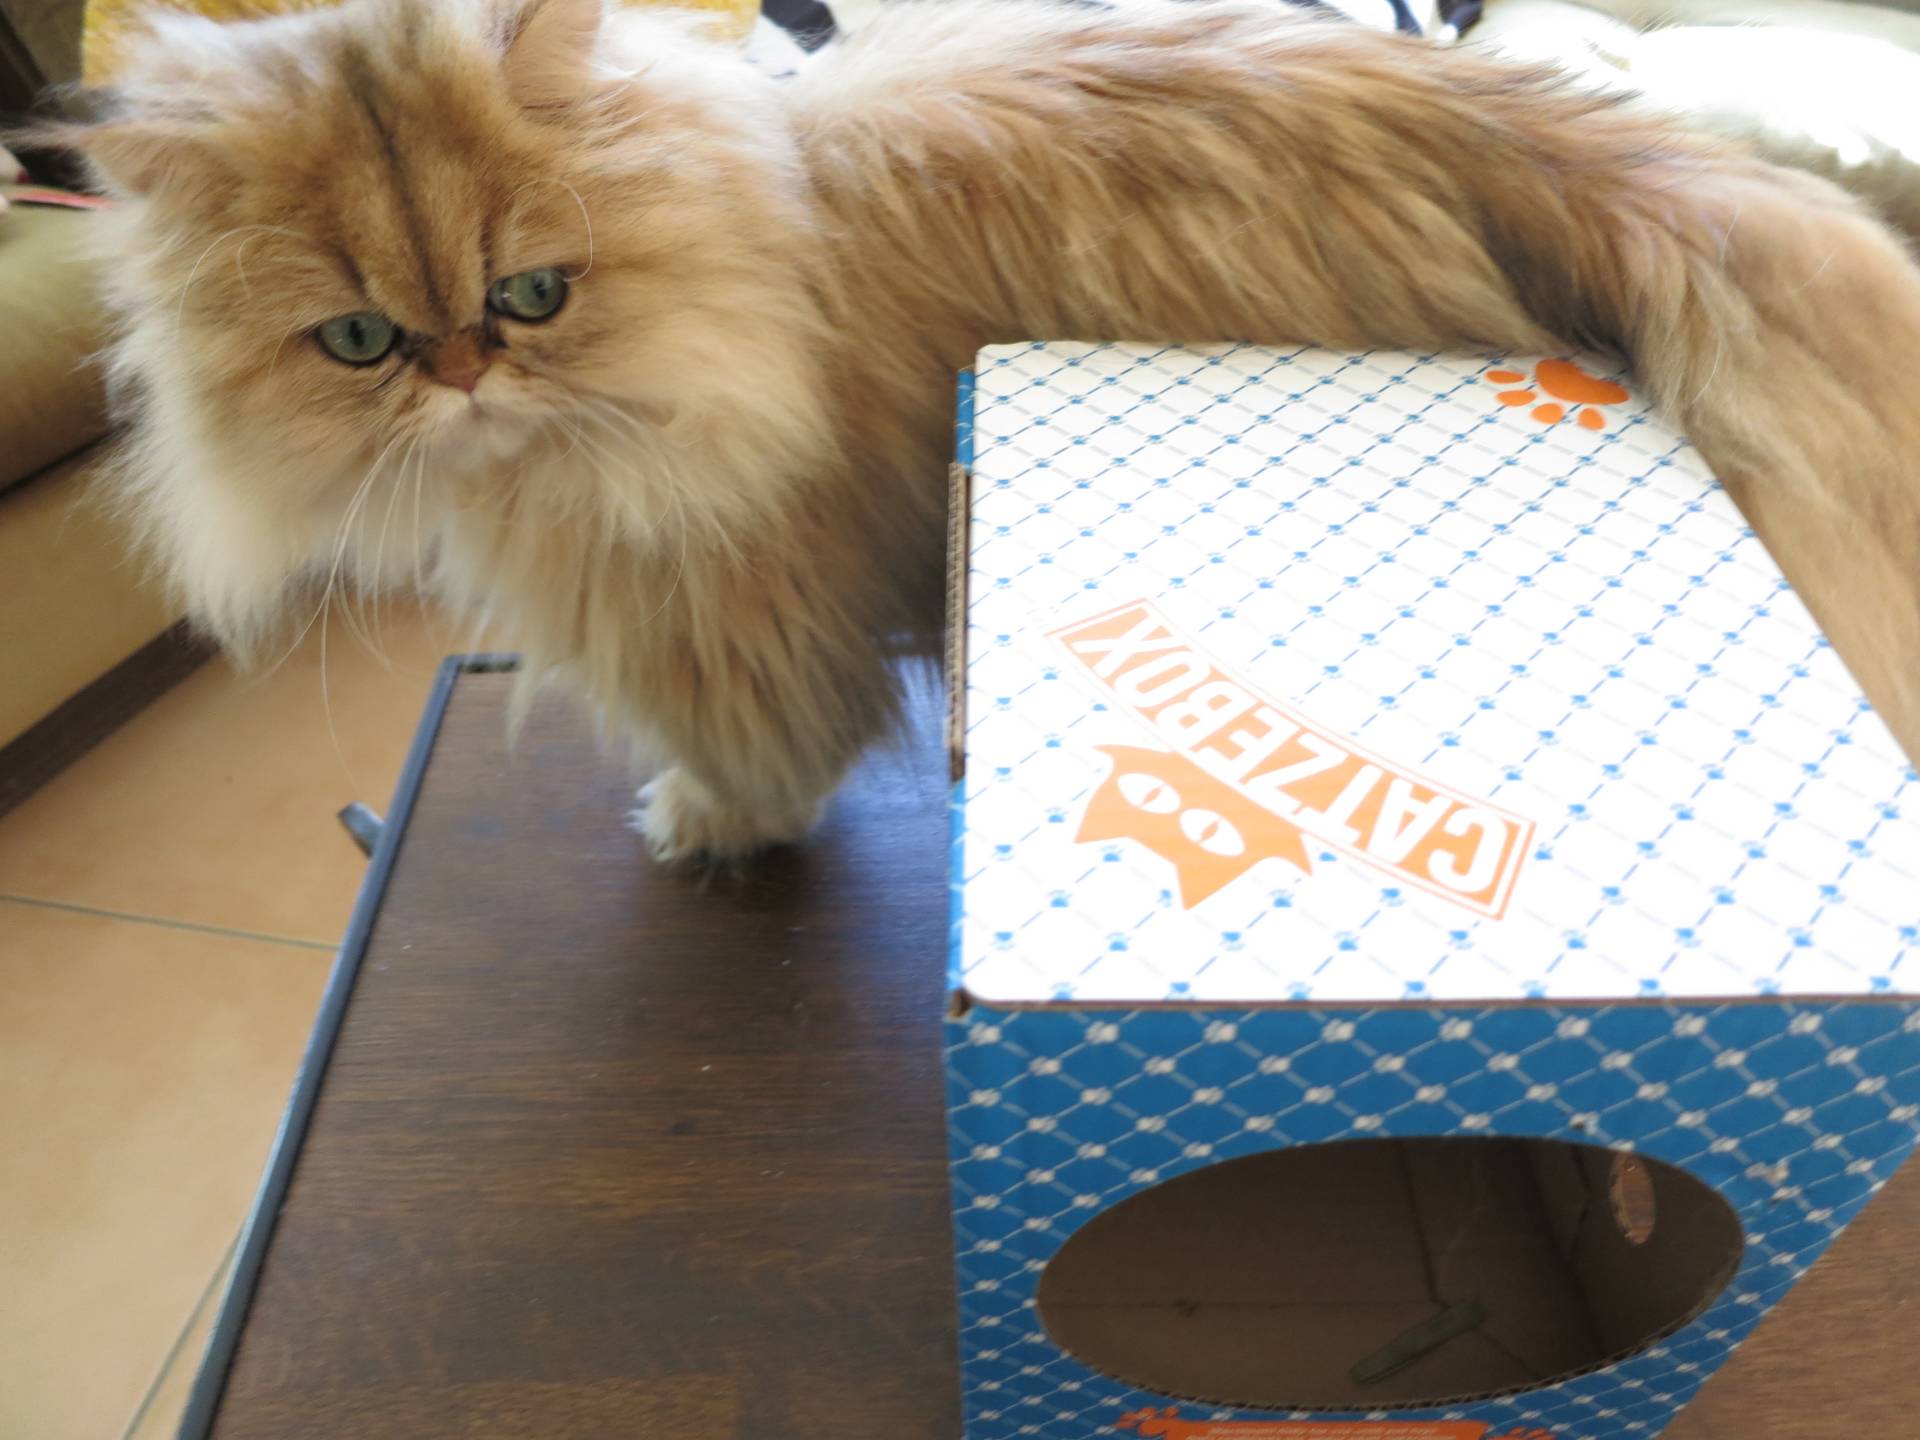 Catzebox Cat Toy Review